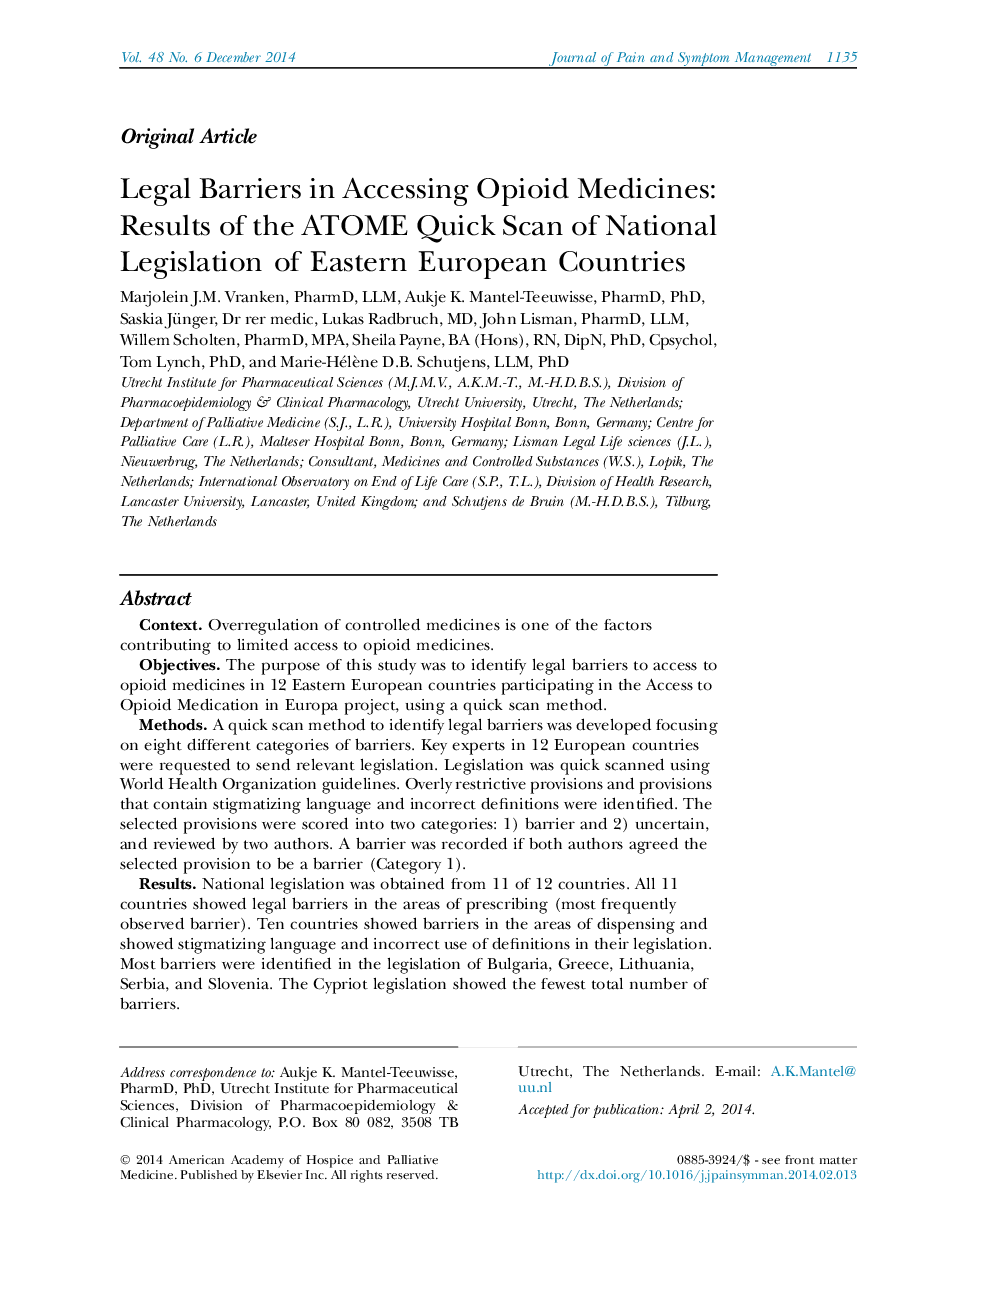 Legal Barriers in Accessing Opioid Medicines: Results of the ATOME Quick Scan of National Legislation of Eastern European Countries